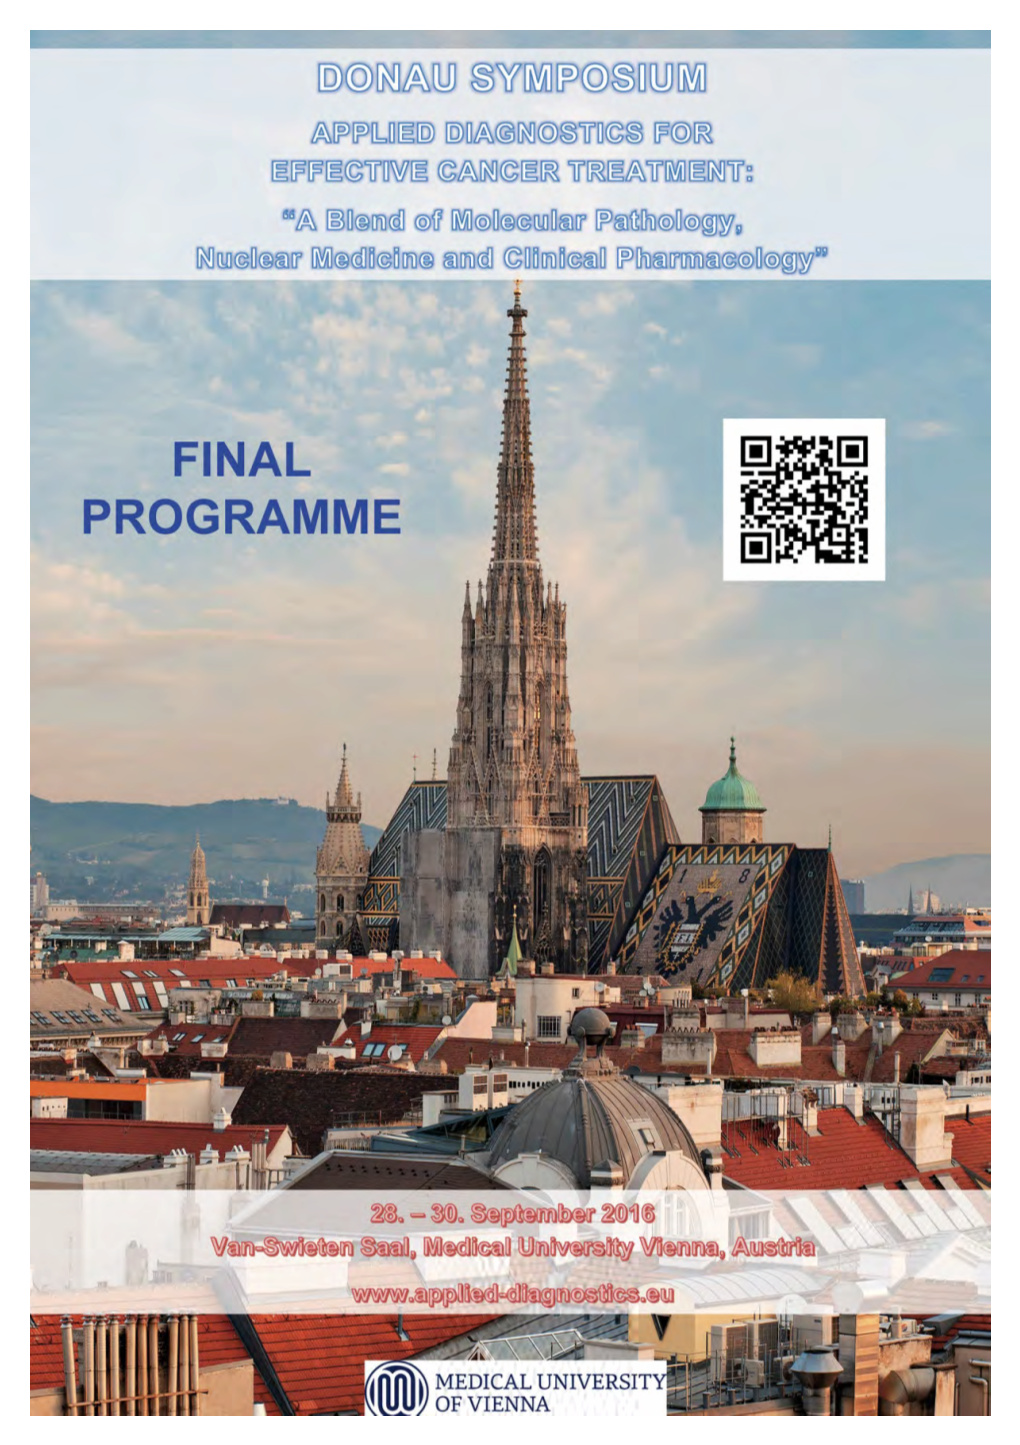 DONAU SYMPOSIUM APPLIED DIAGNOSTICS for EFFECTIVE CANCER TREATMENT: “A Blend of Molecular Pathology, Nuclear Medicine and Clinical Pharmacology” 28.–30